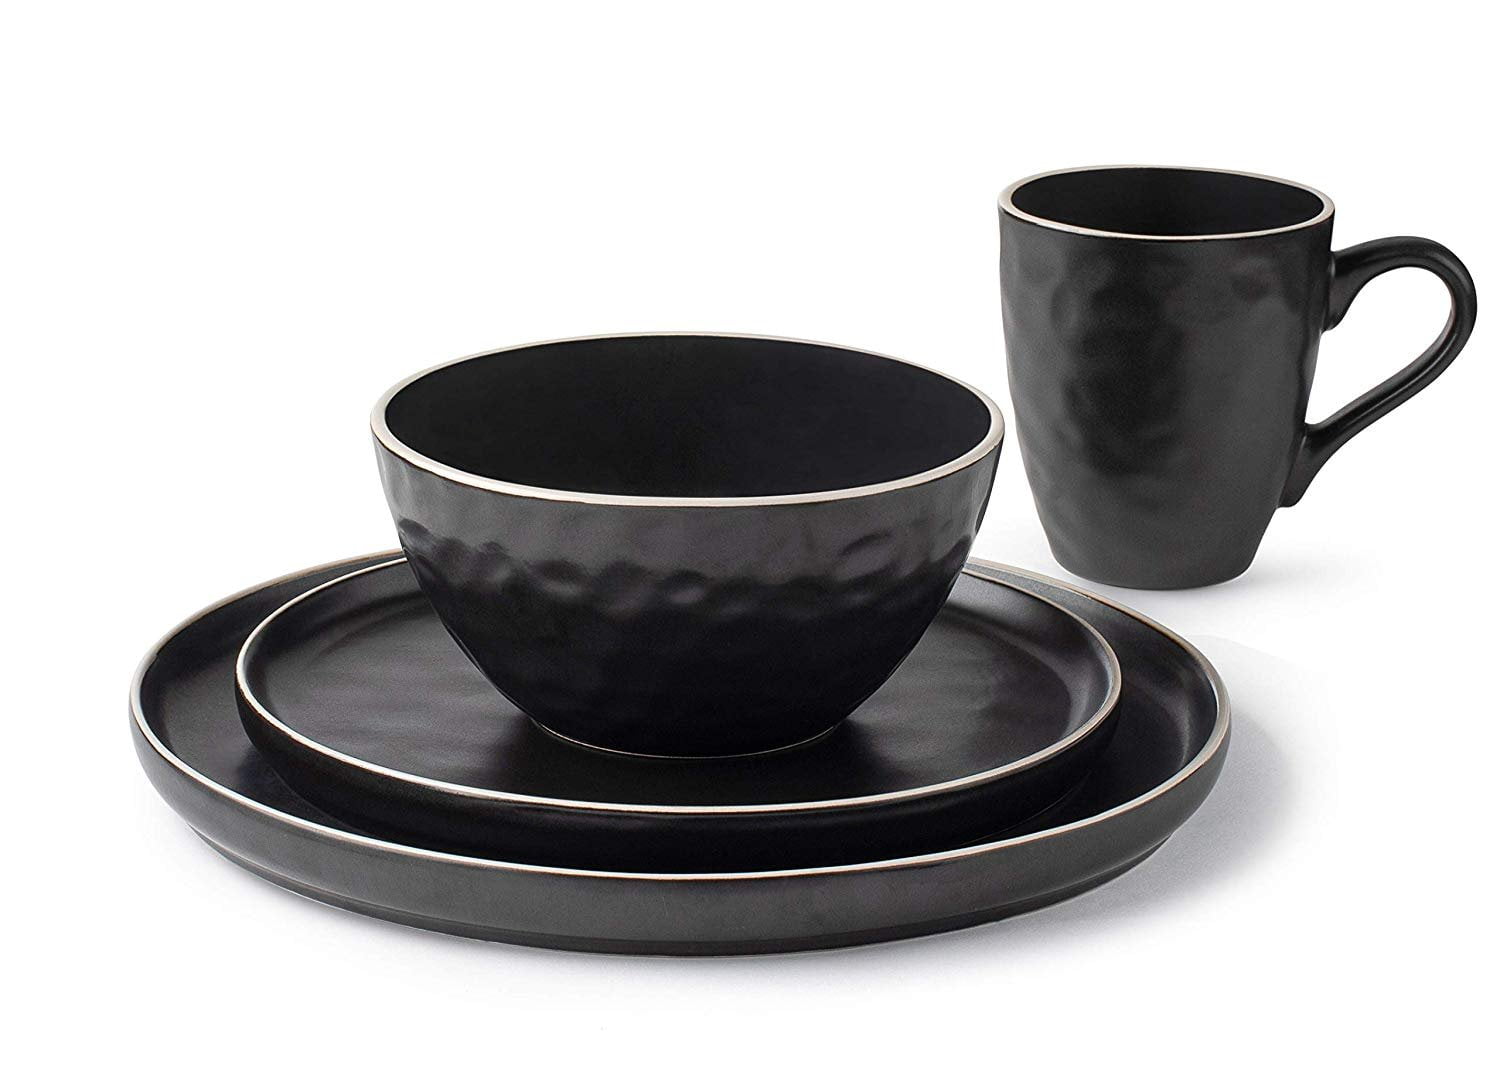 Elegant Black Textured Finish Black La Rochelle 16 Piece Dish Set with Salad and Dinner Plates Decorative Kitchen and Dining Use Crafted with Mercerie Reactive Coffee Cups and Soup Bowls 